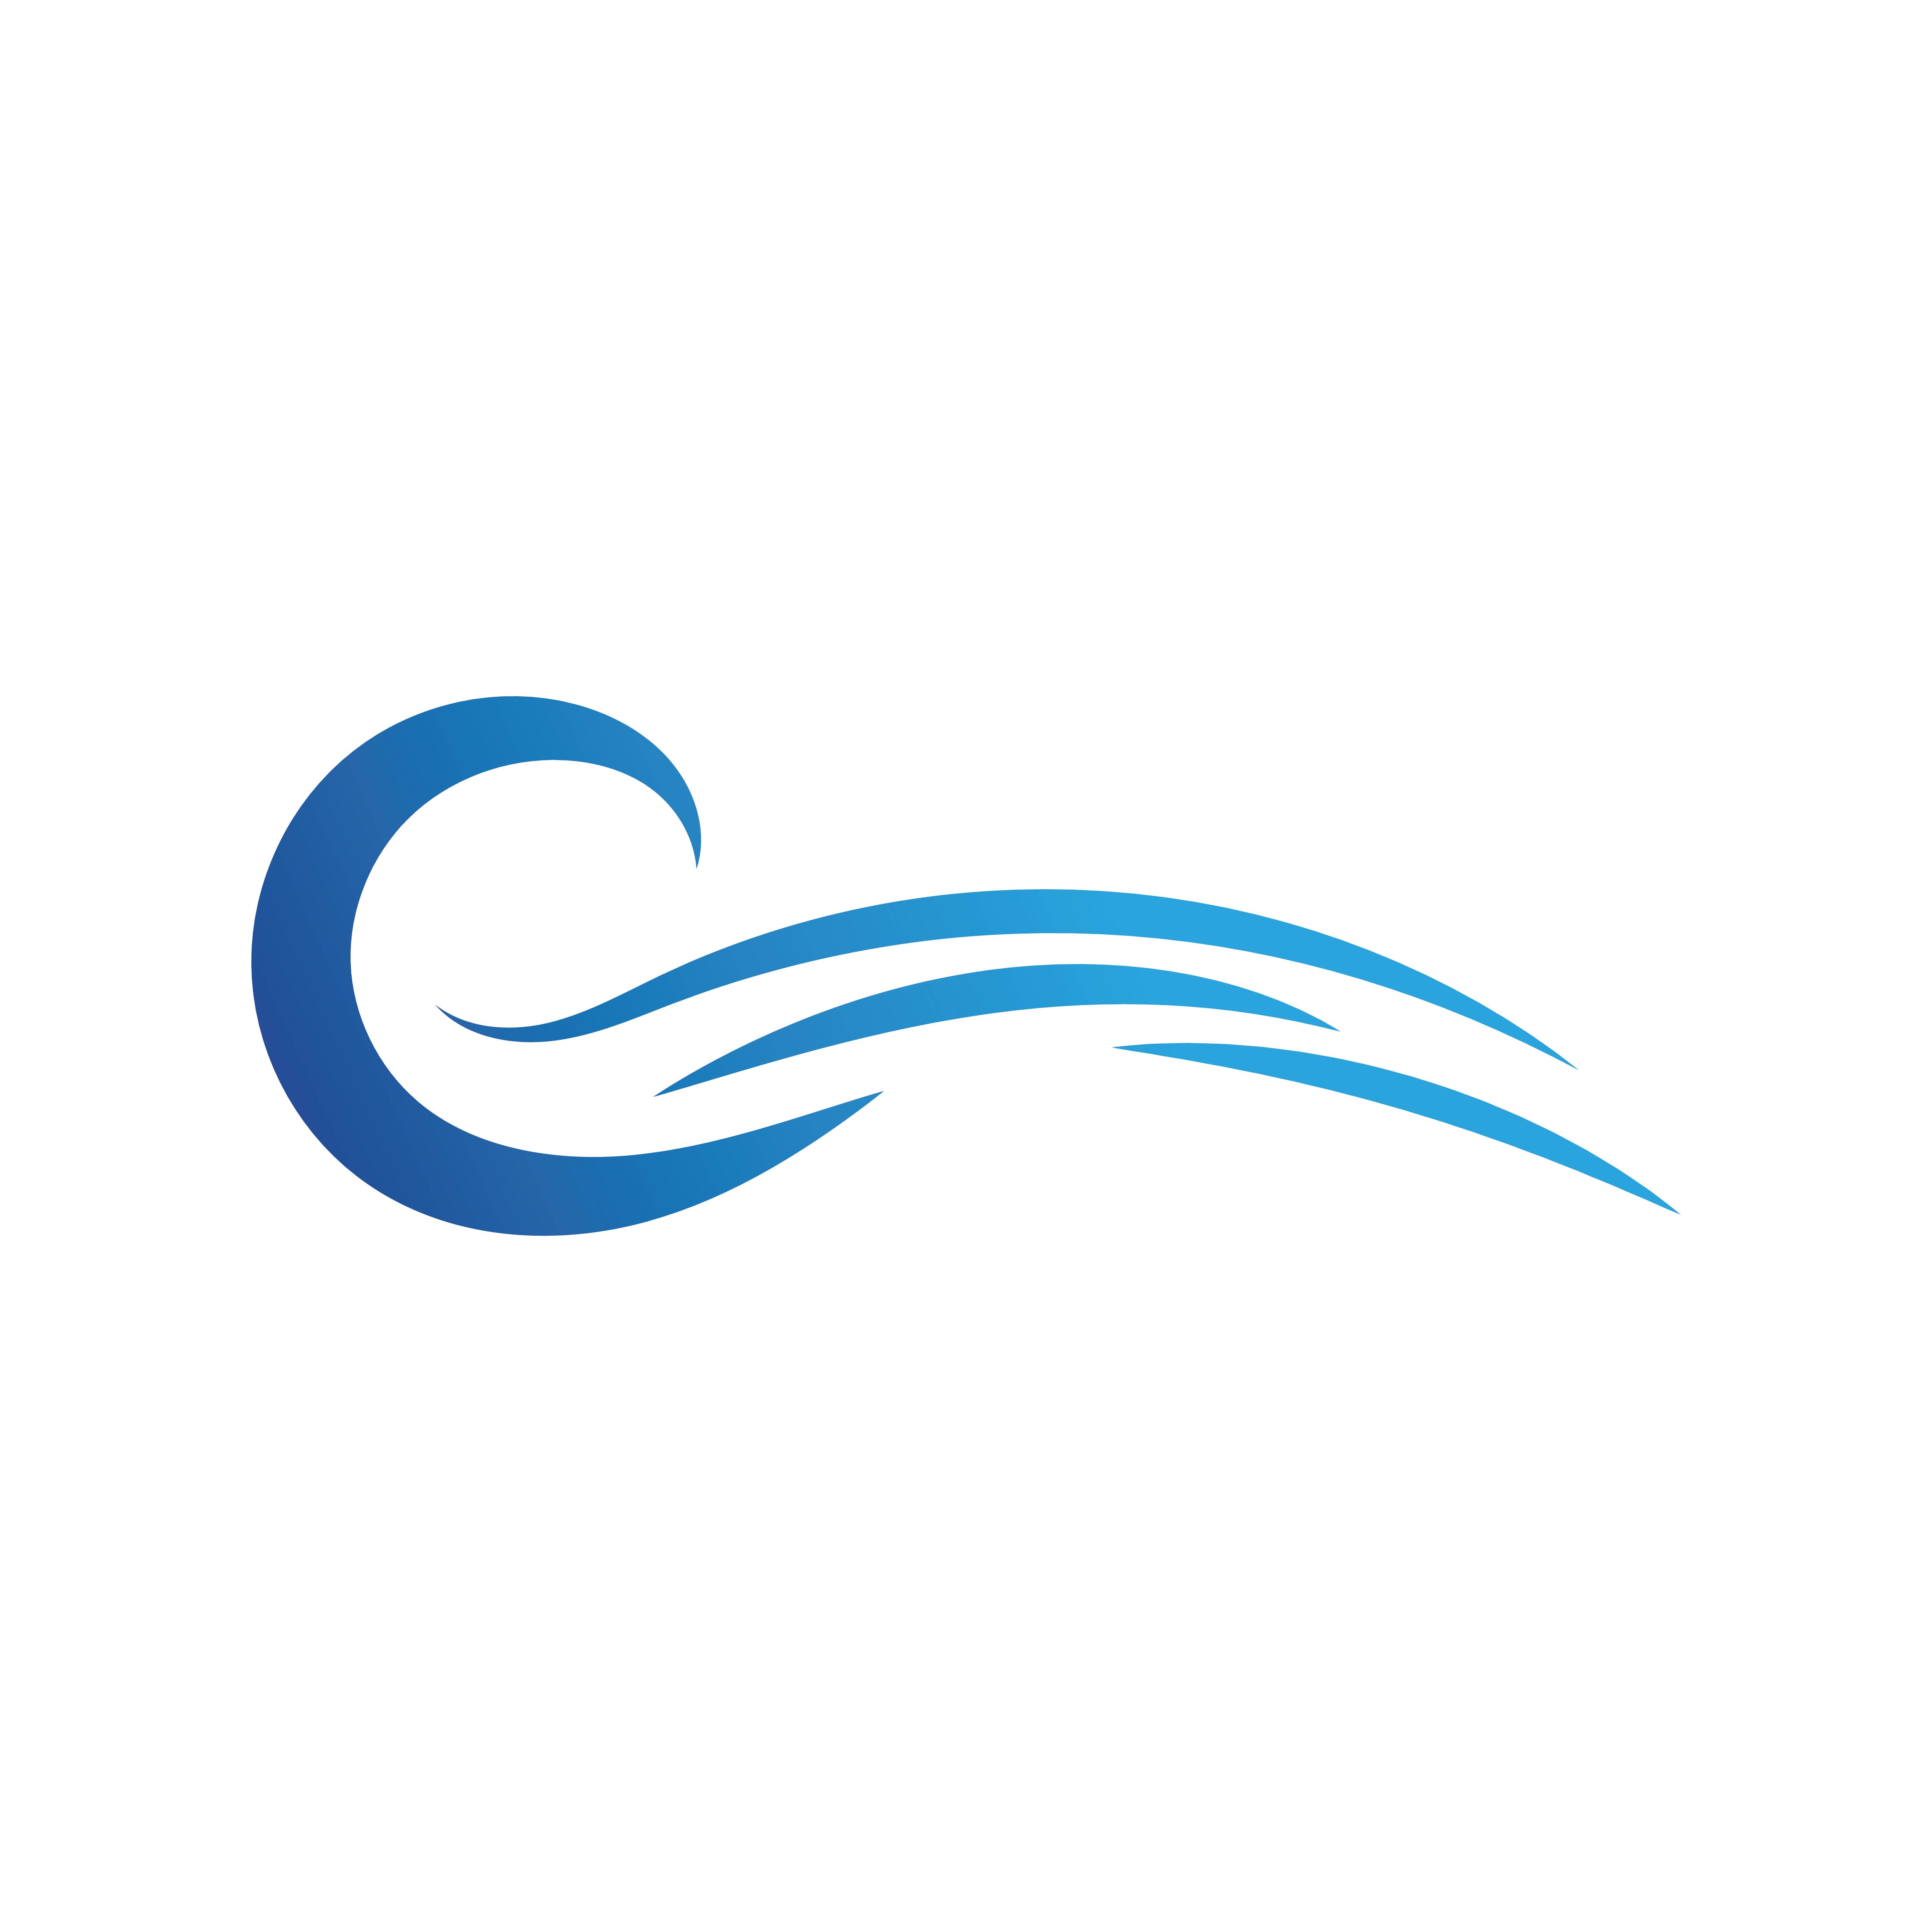 Water wave beach logo symbol pinterest preview image.